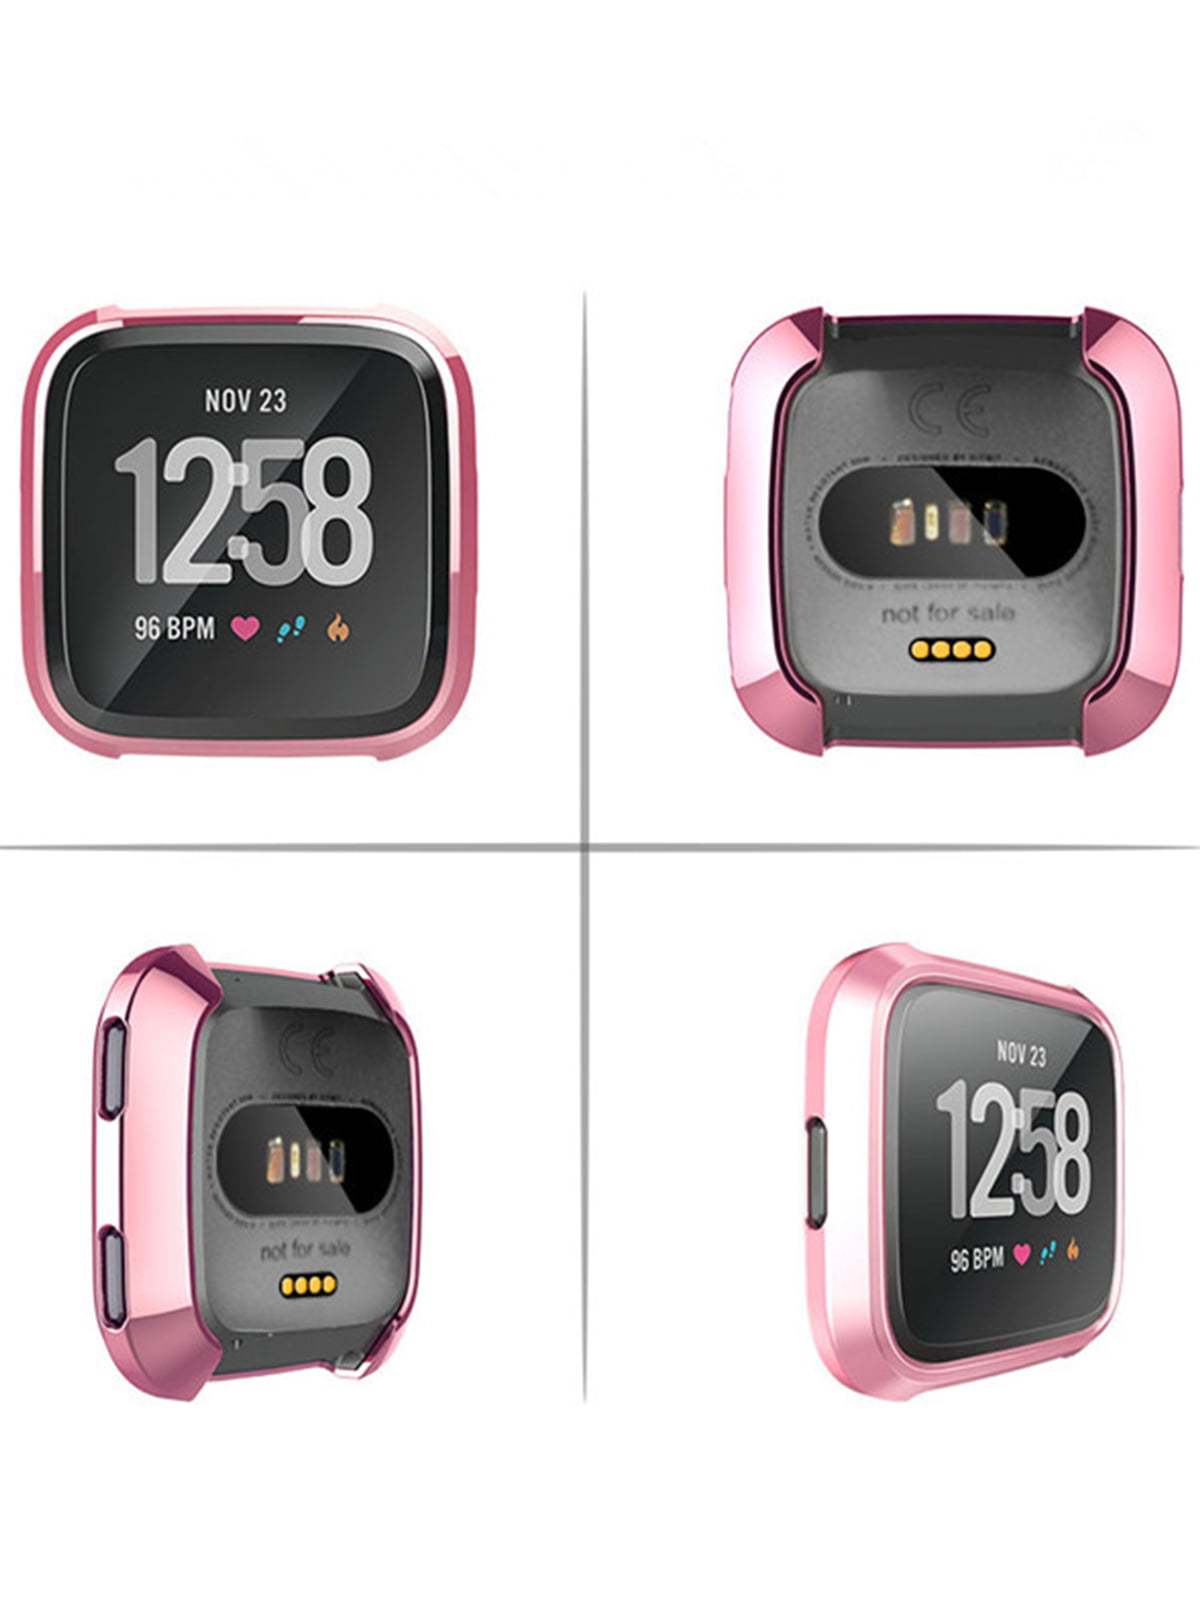 4 Pack Soft TPU Plated Screen Bumper Protective Cover Case for Fitbit Versa 2 Smartwatch Rosegold+Rosepink+Black+Graphite NOT FOR VERSA & VERSA LITE KIMILAR Screen Protector for Fitbit Versa 2 